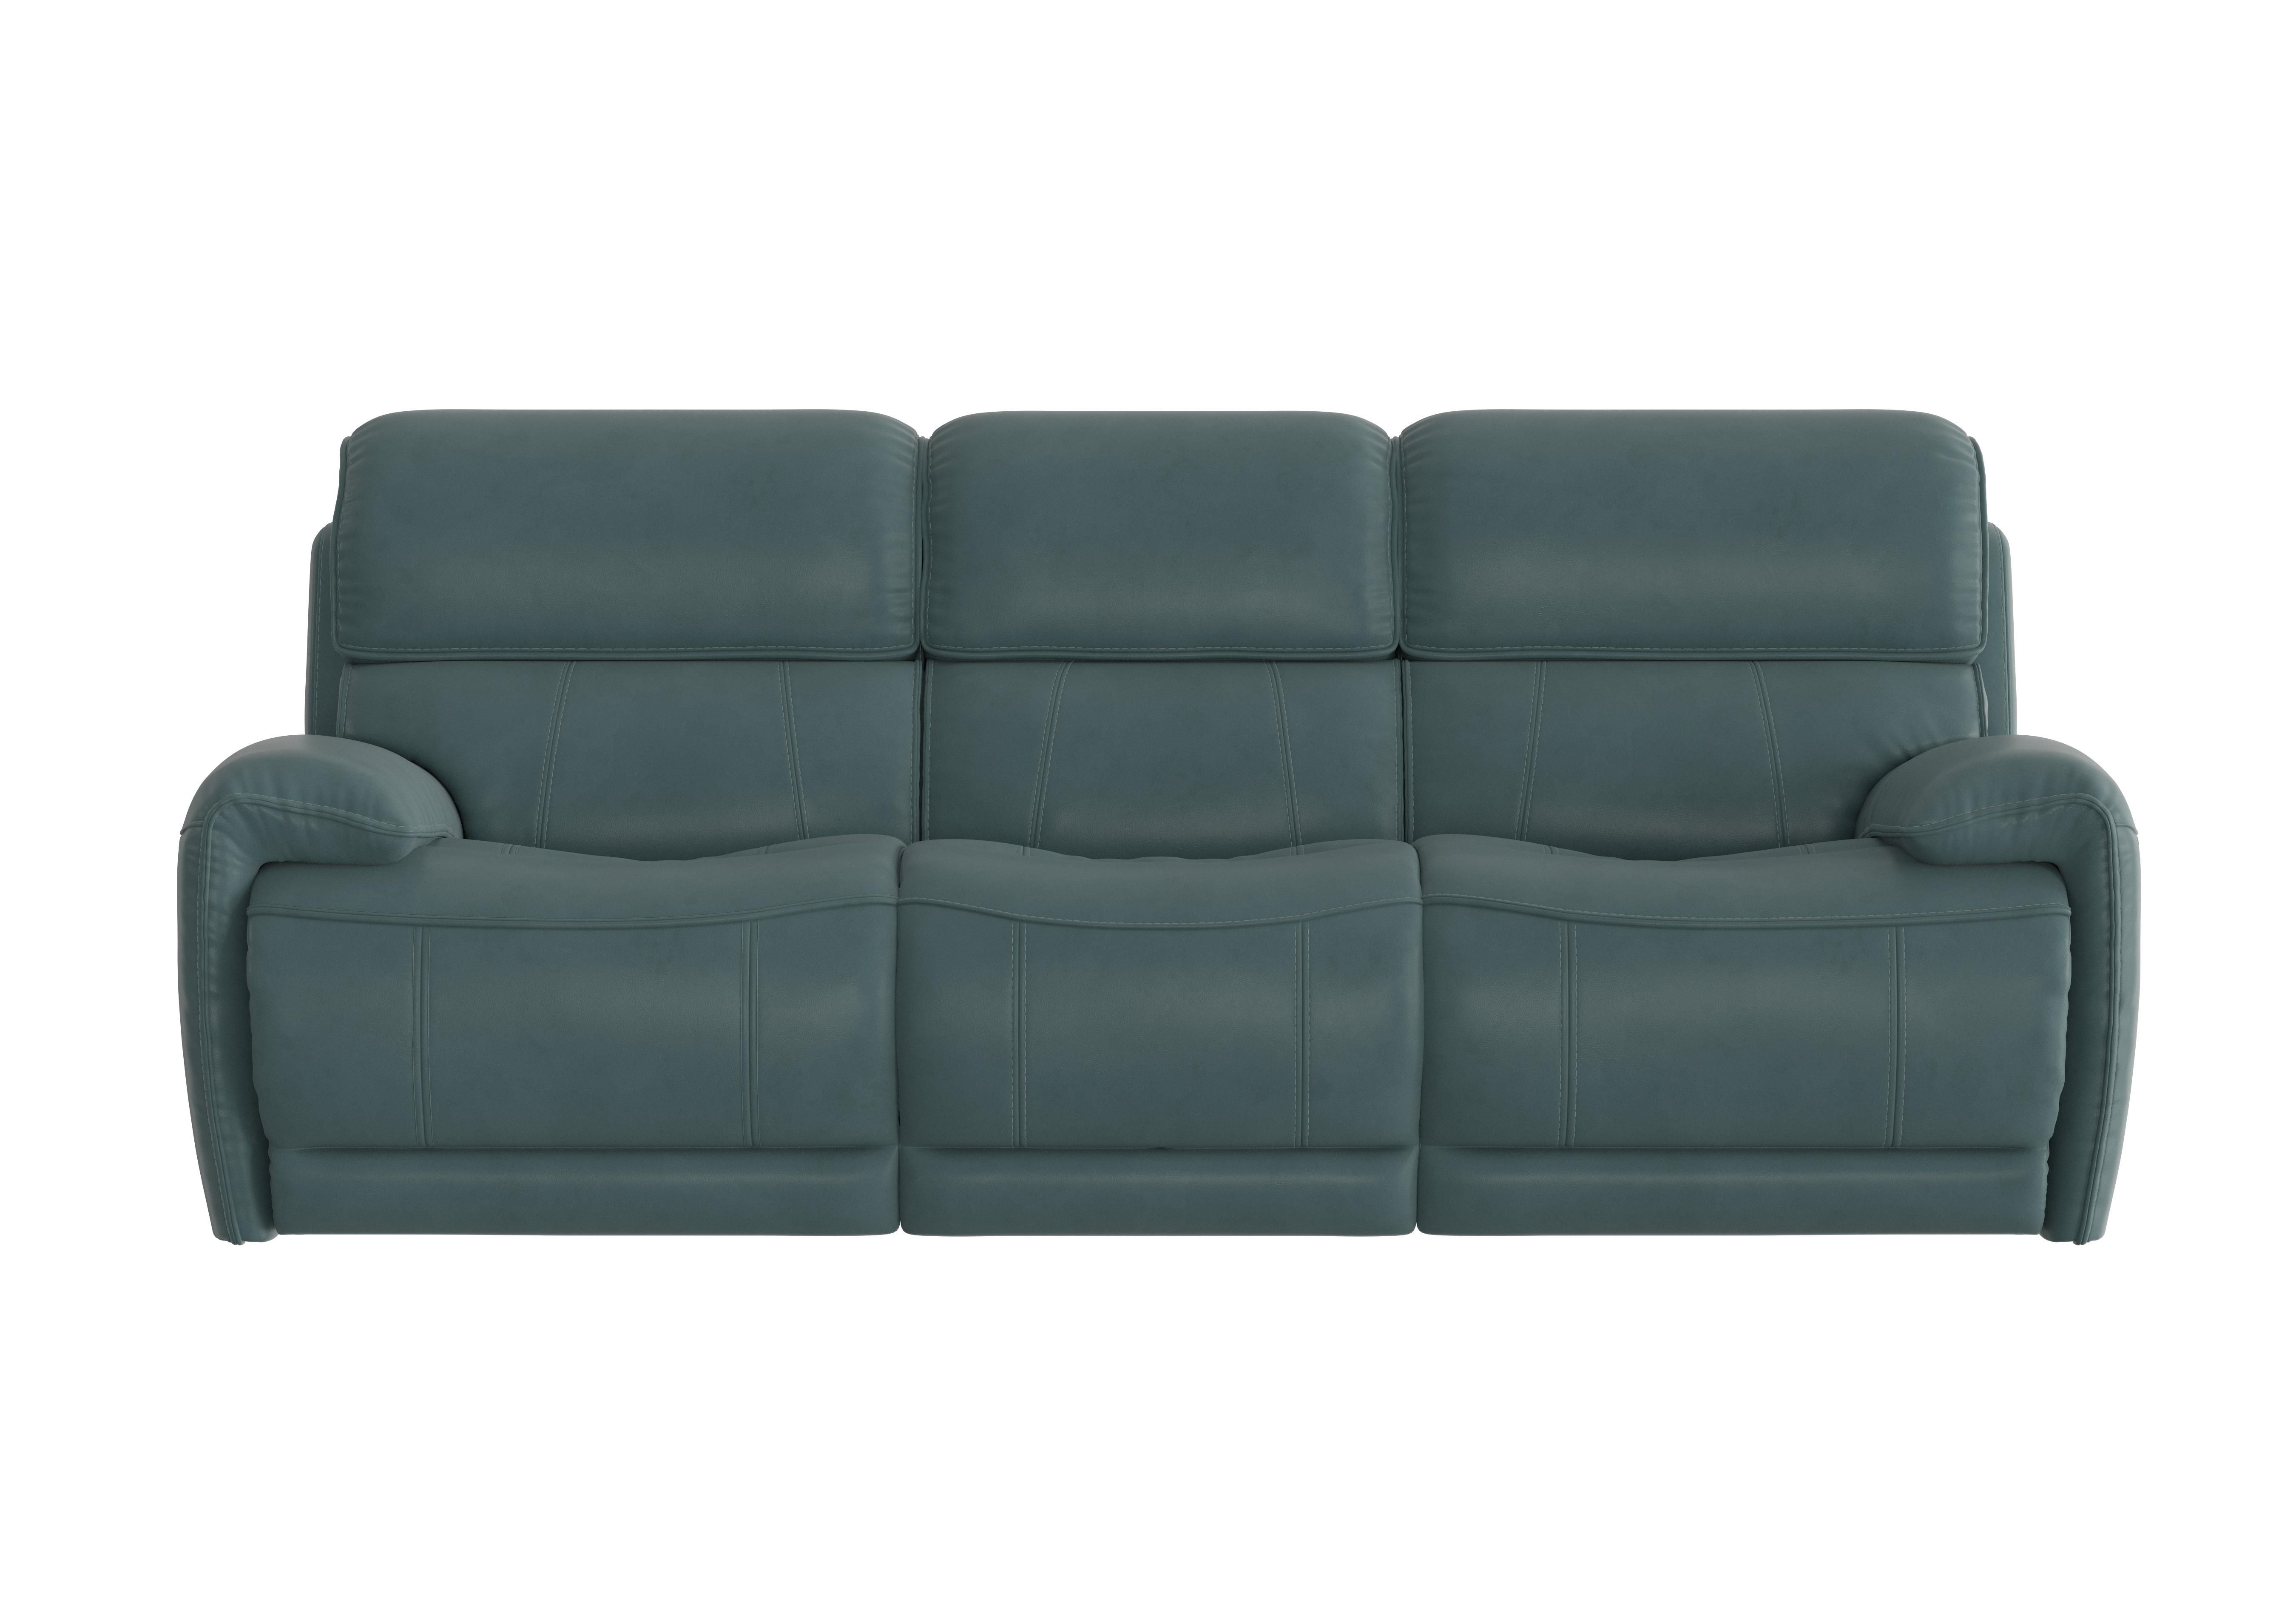 Link 3 Seater Leather Power Recliner Sofa with Power Headrests in Bv-301e Lake Green on Furniture Village